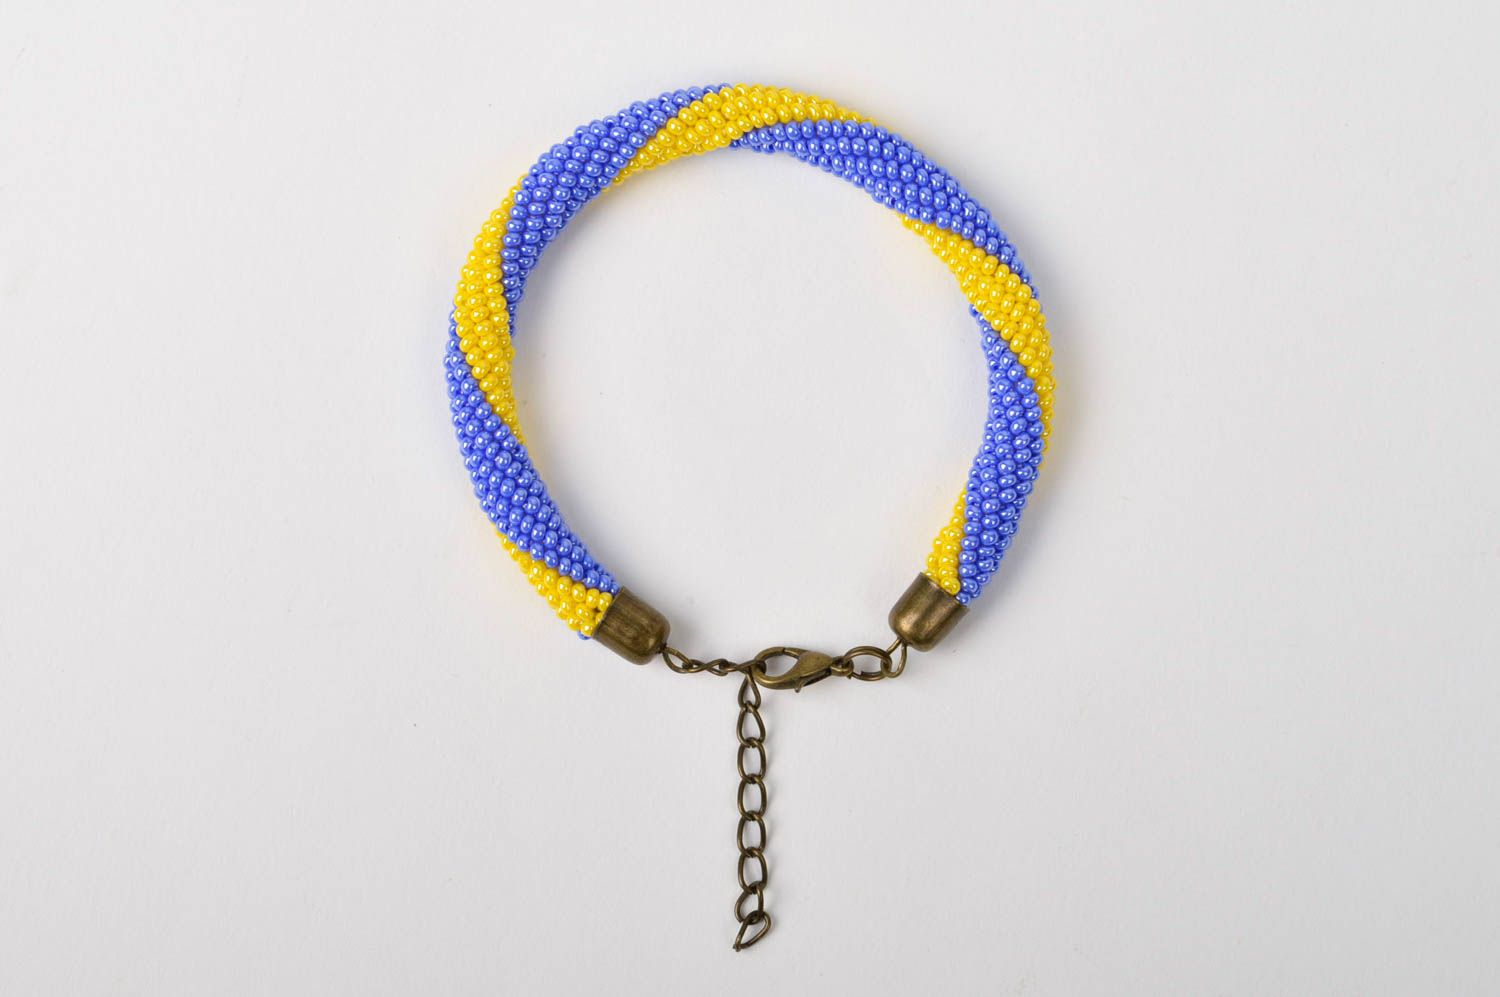 Beaded yellow and blue color wrist adjustable bracelet photo 5